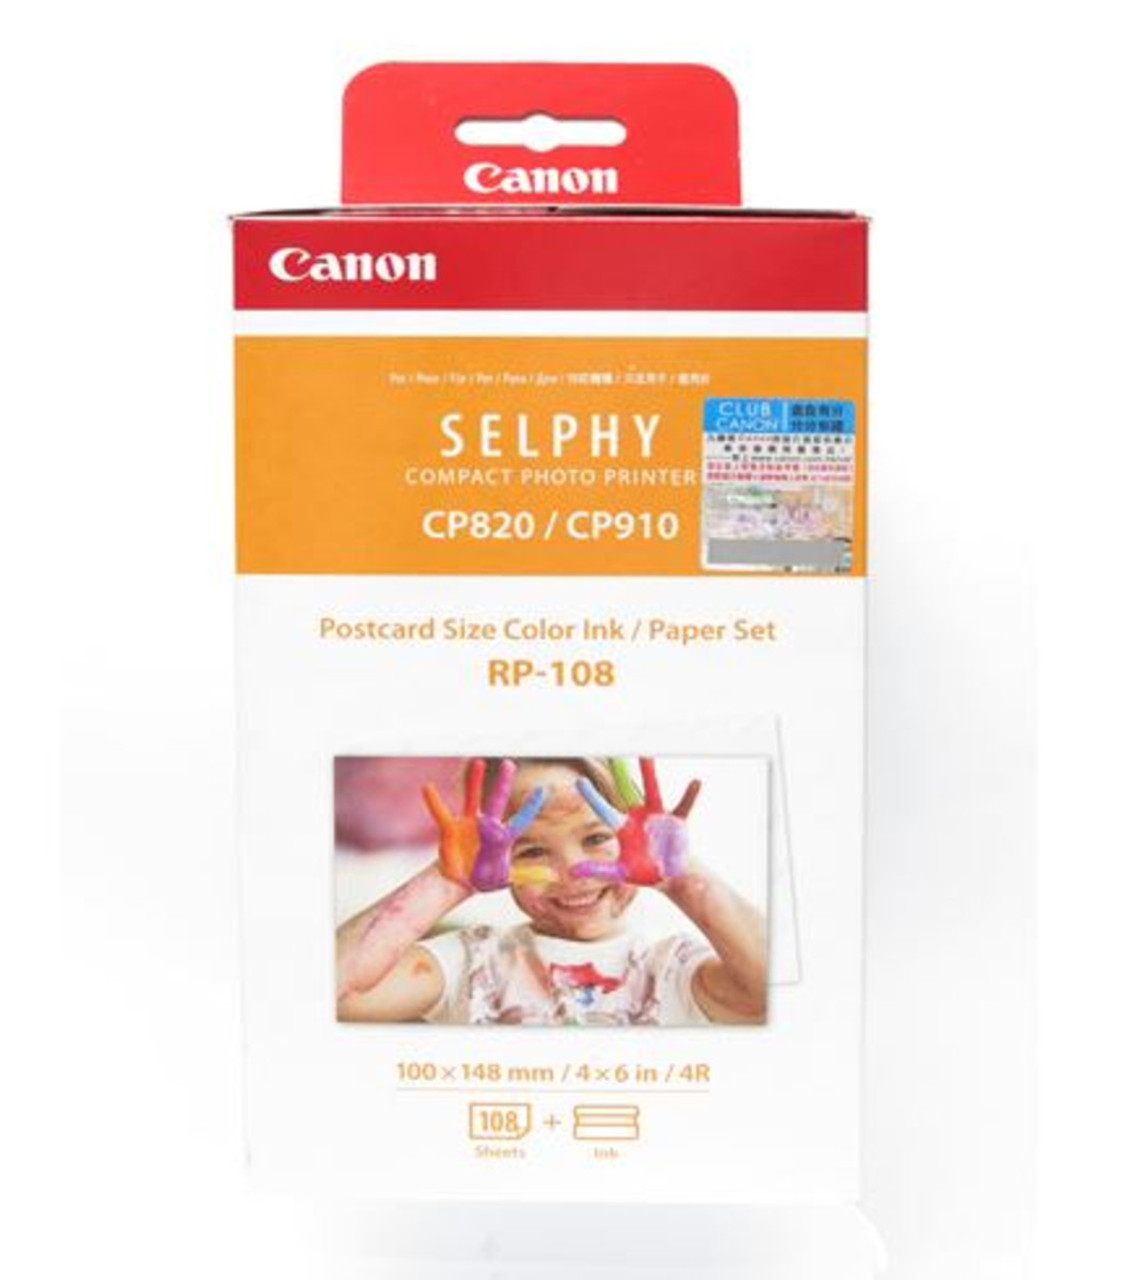 Canon RP-108 (4R Size Photo Paper & Ink Cartridge)